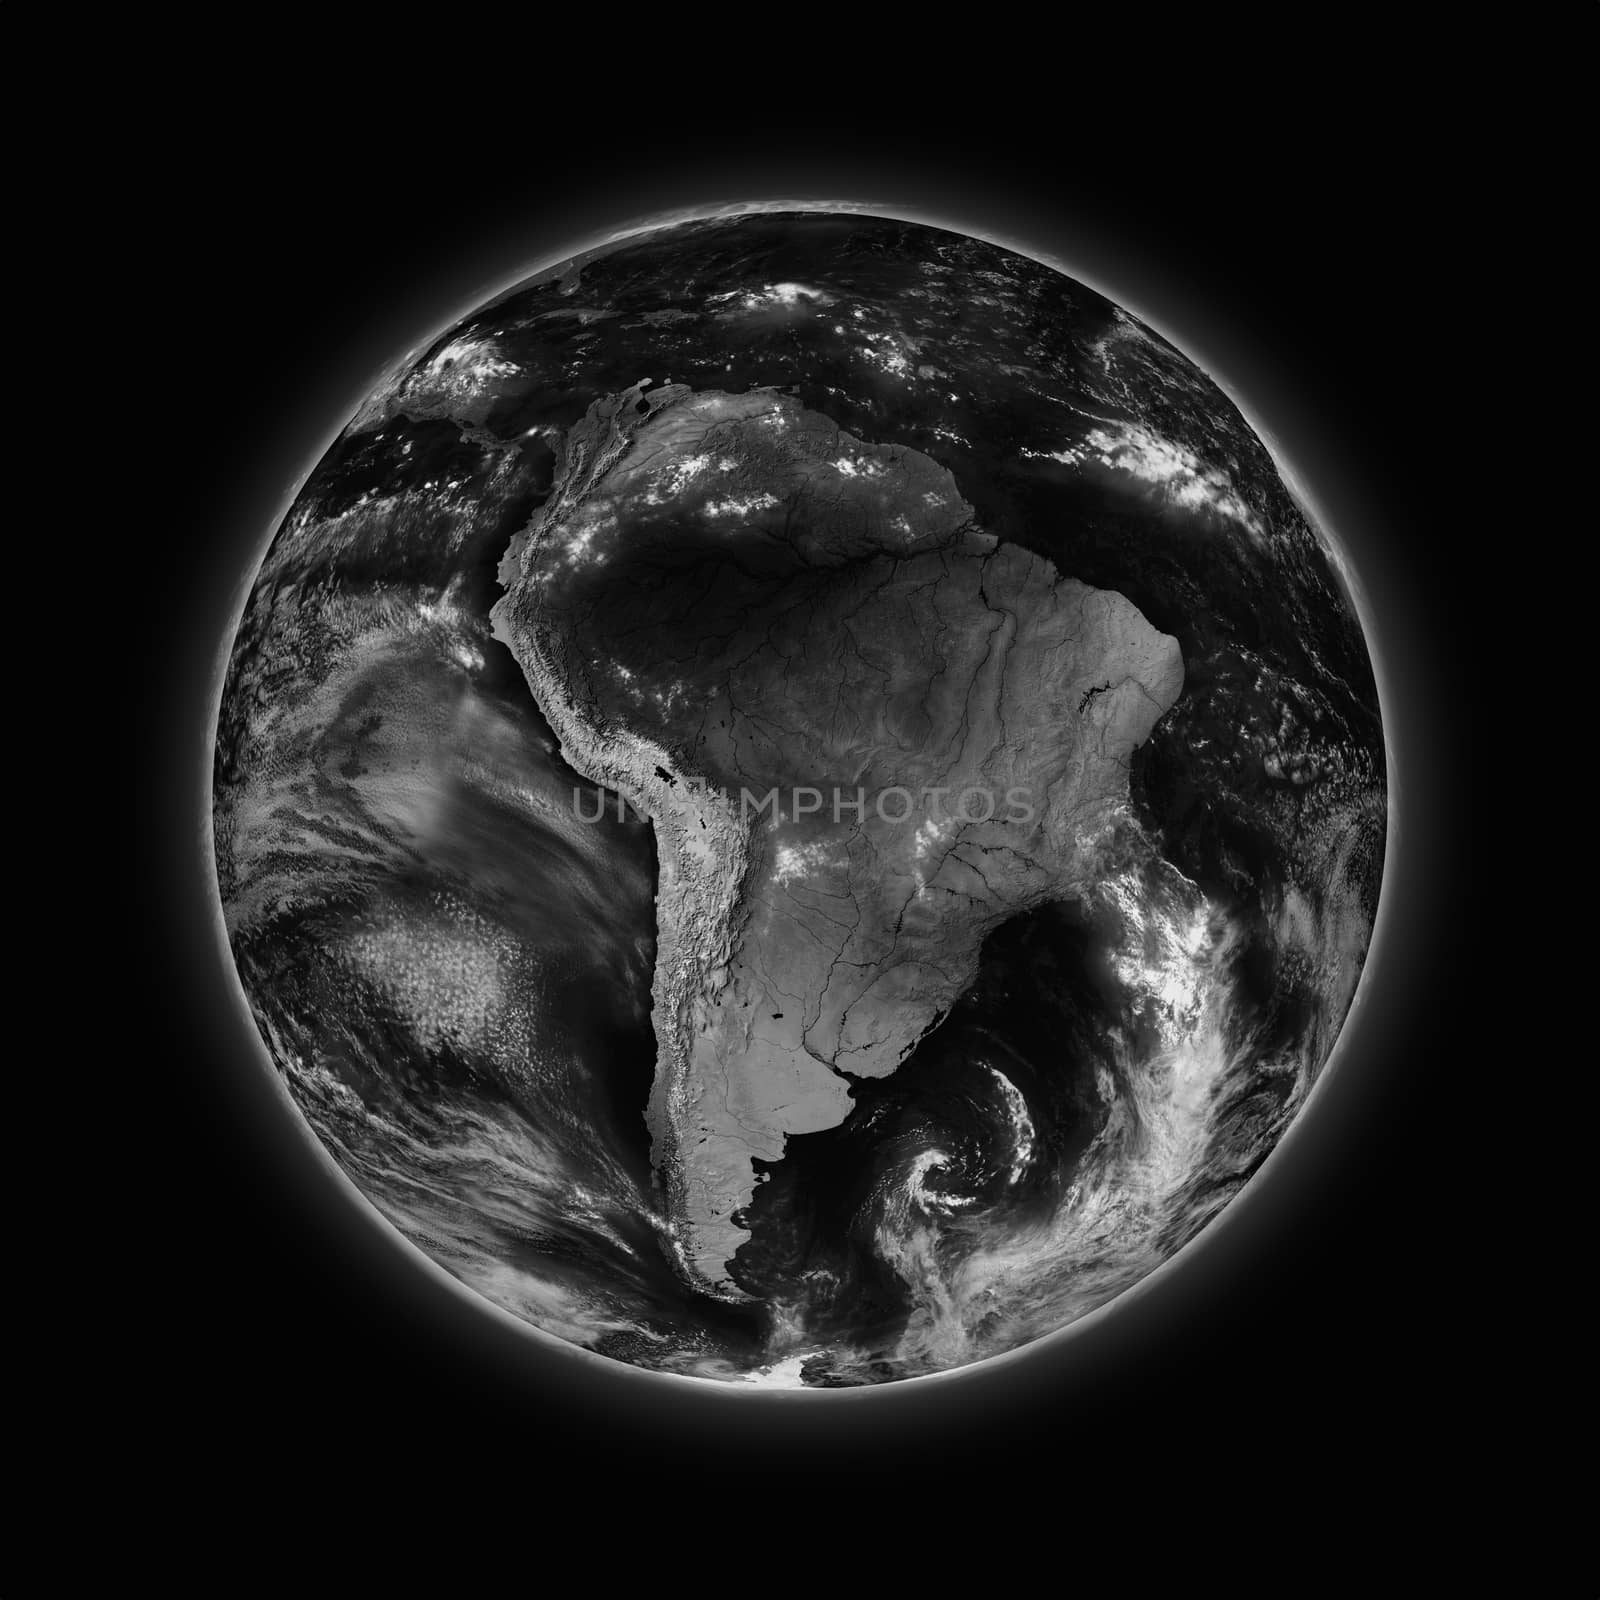 South America on dark planet Earth isolated on black background. Highly detailed planet surface. Elements of this image furnished by NASA.